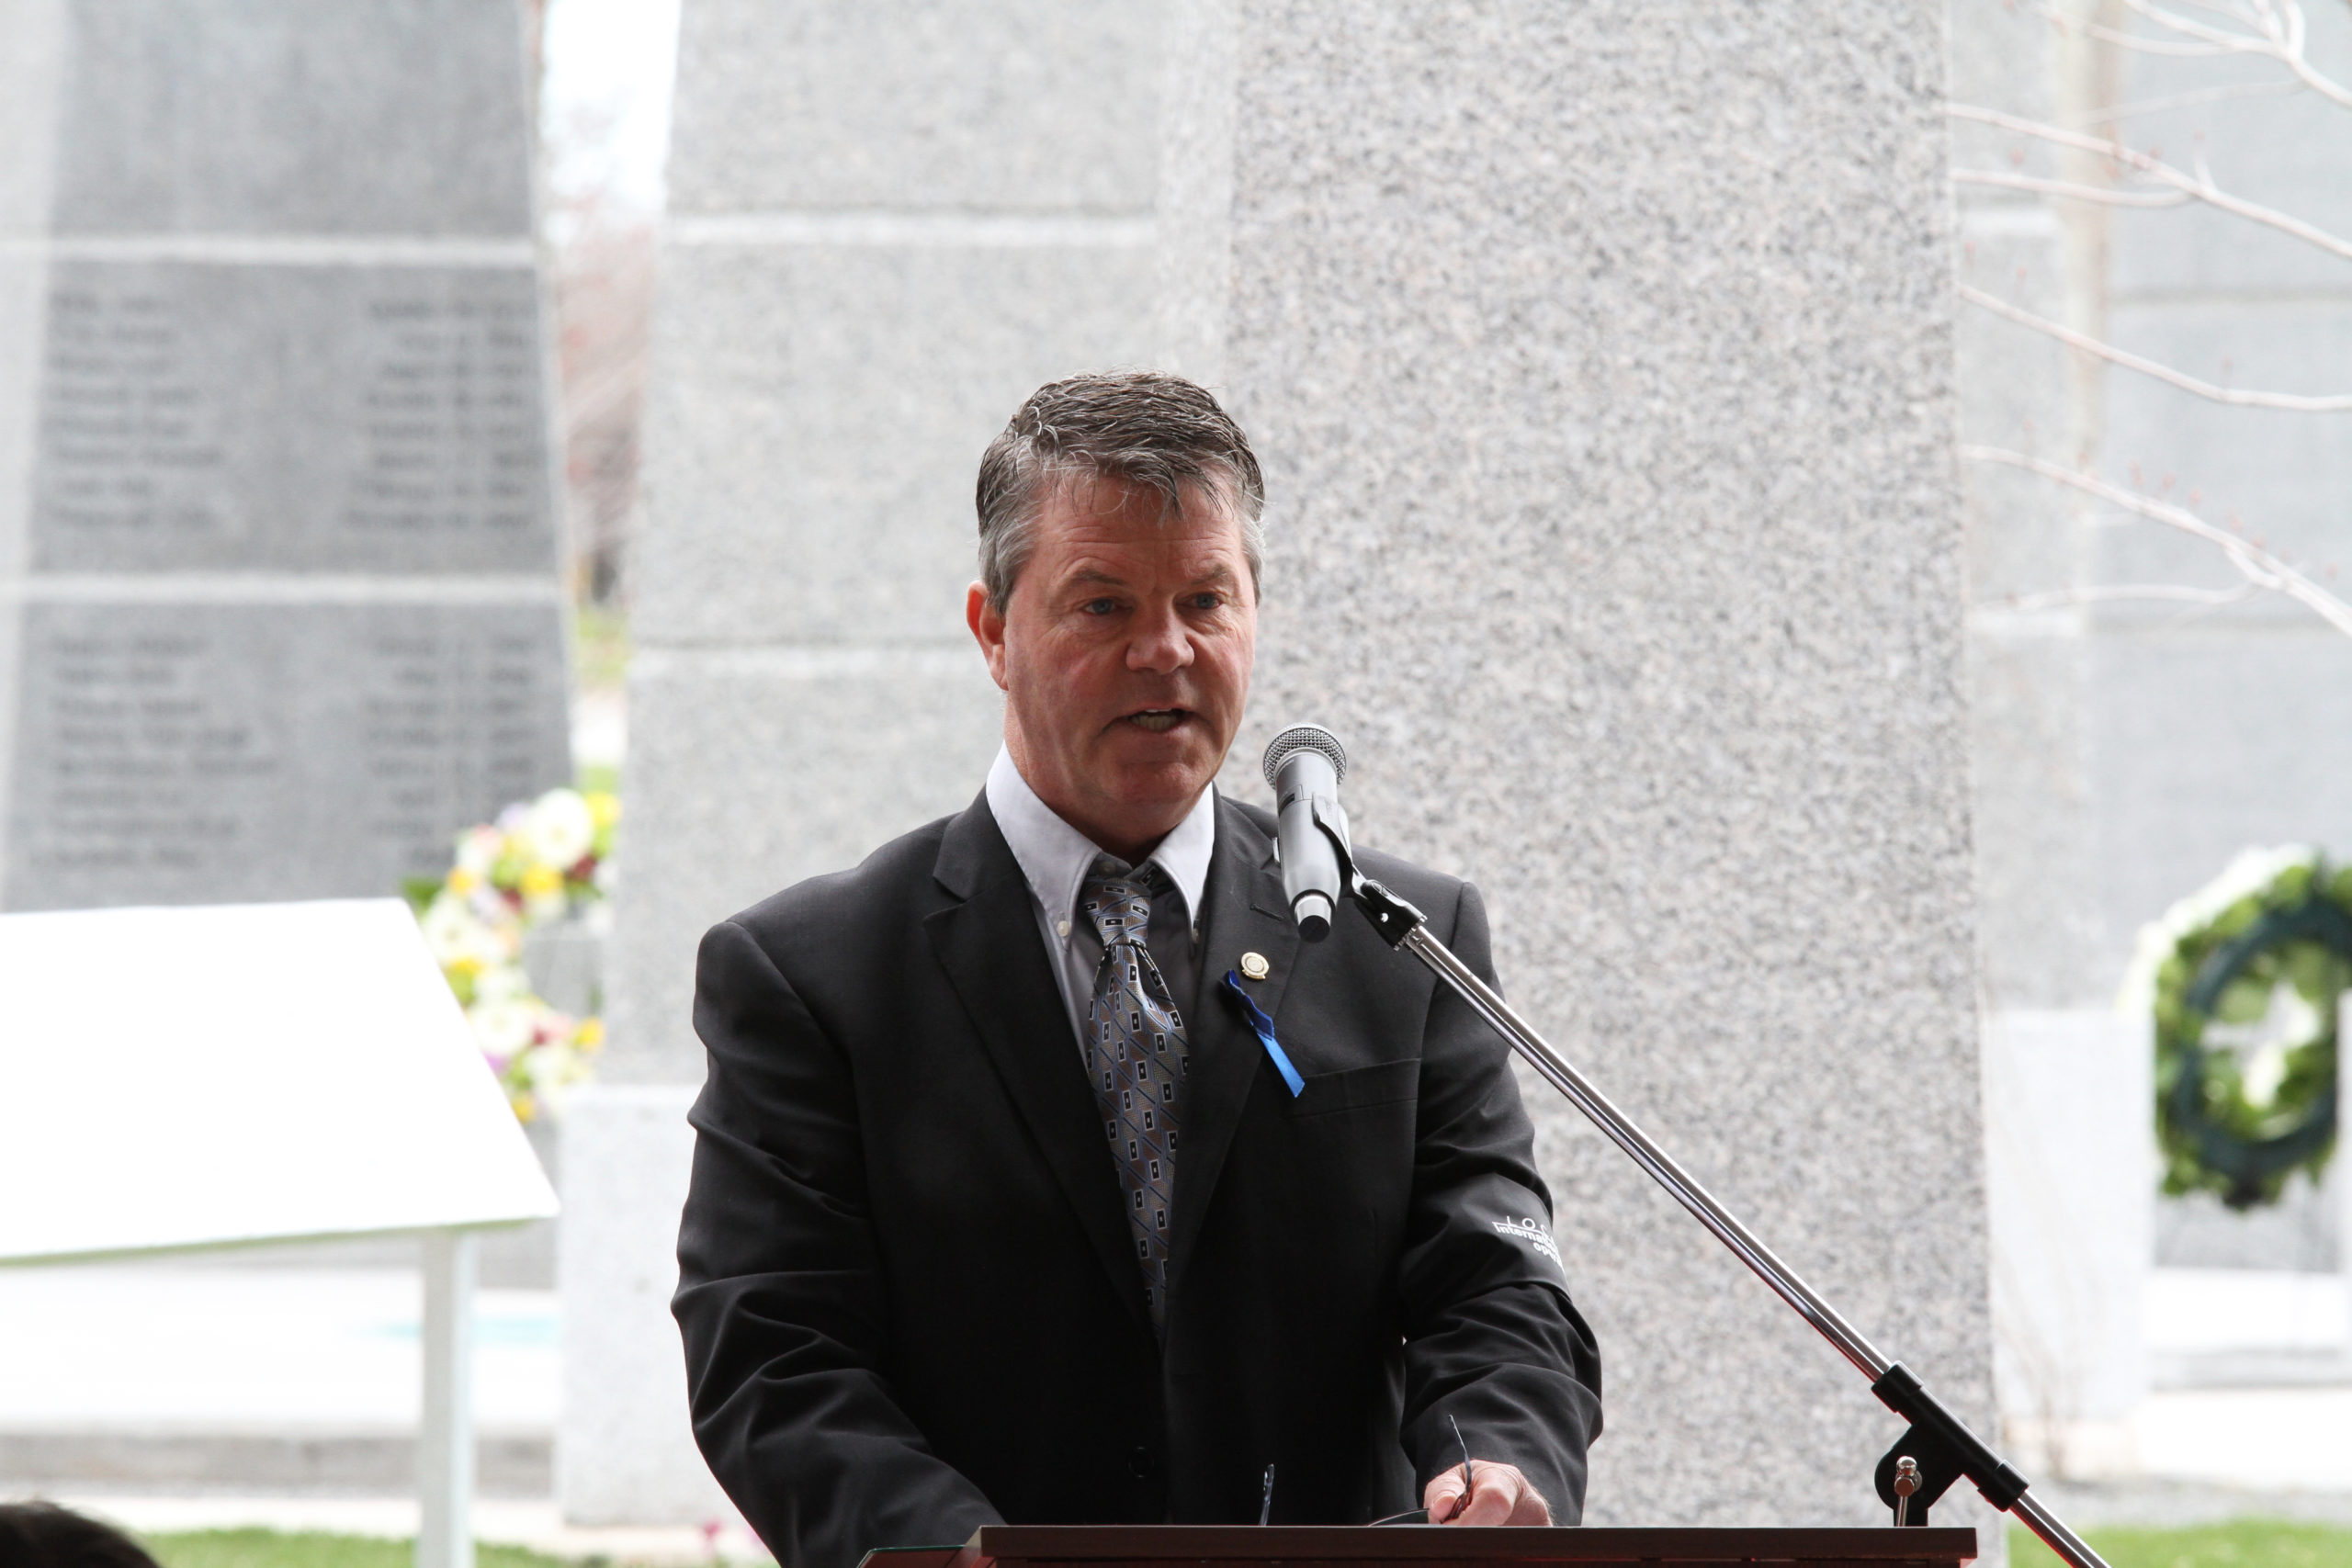 Local 793 President Joe Redshaw delivers remarks at the event.